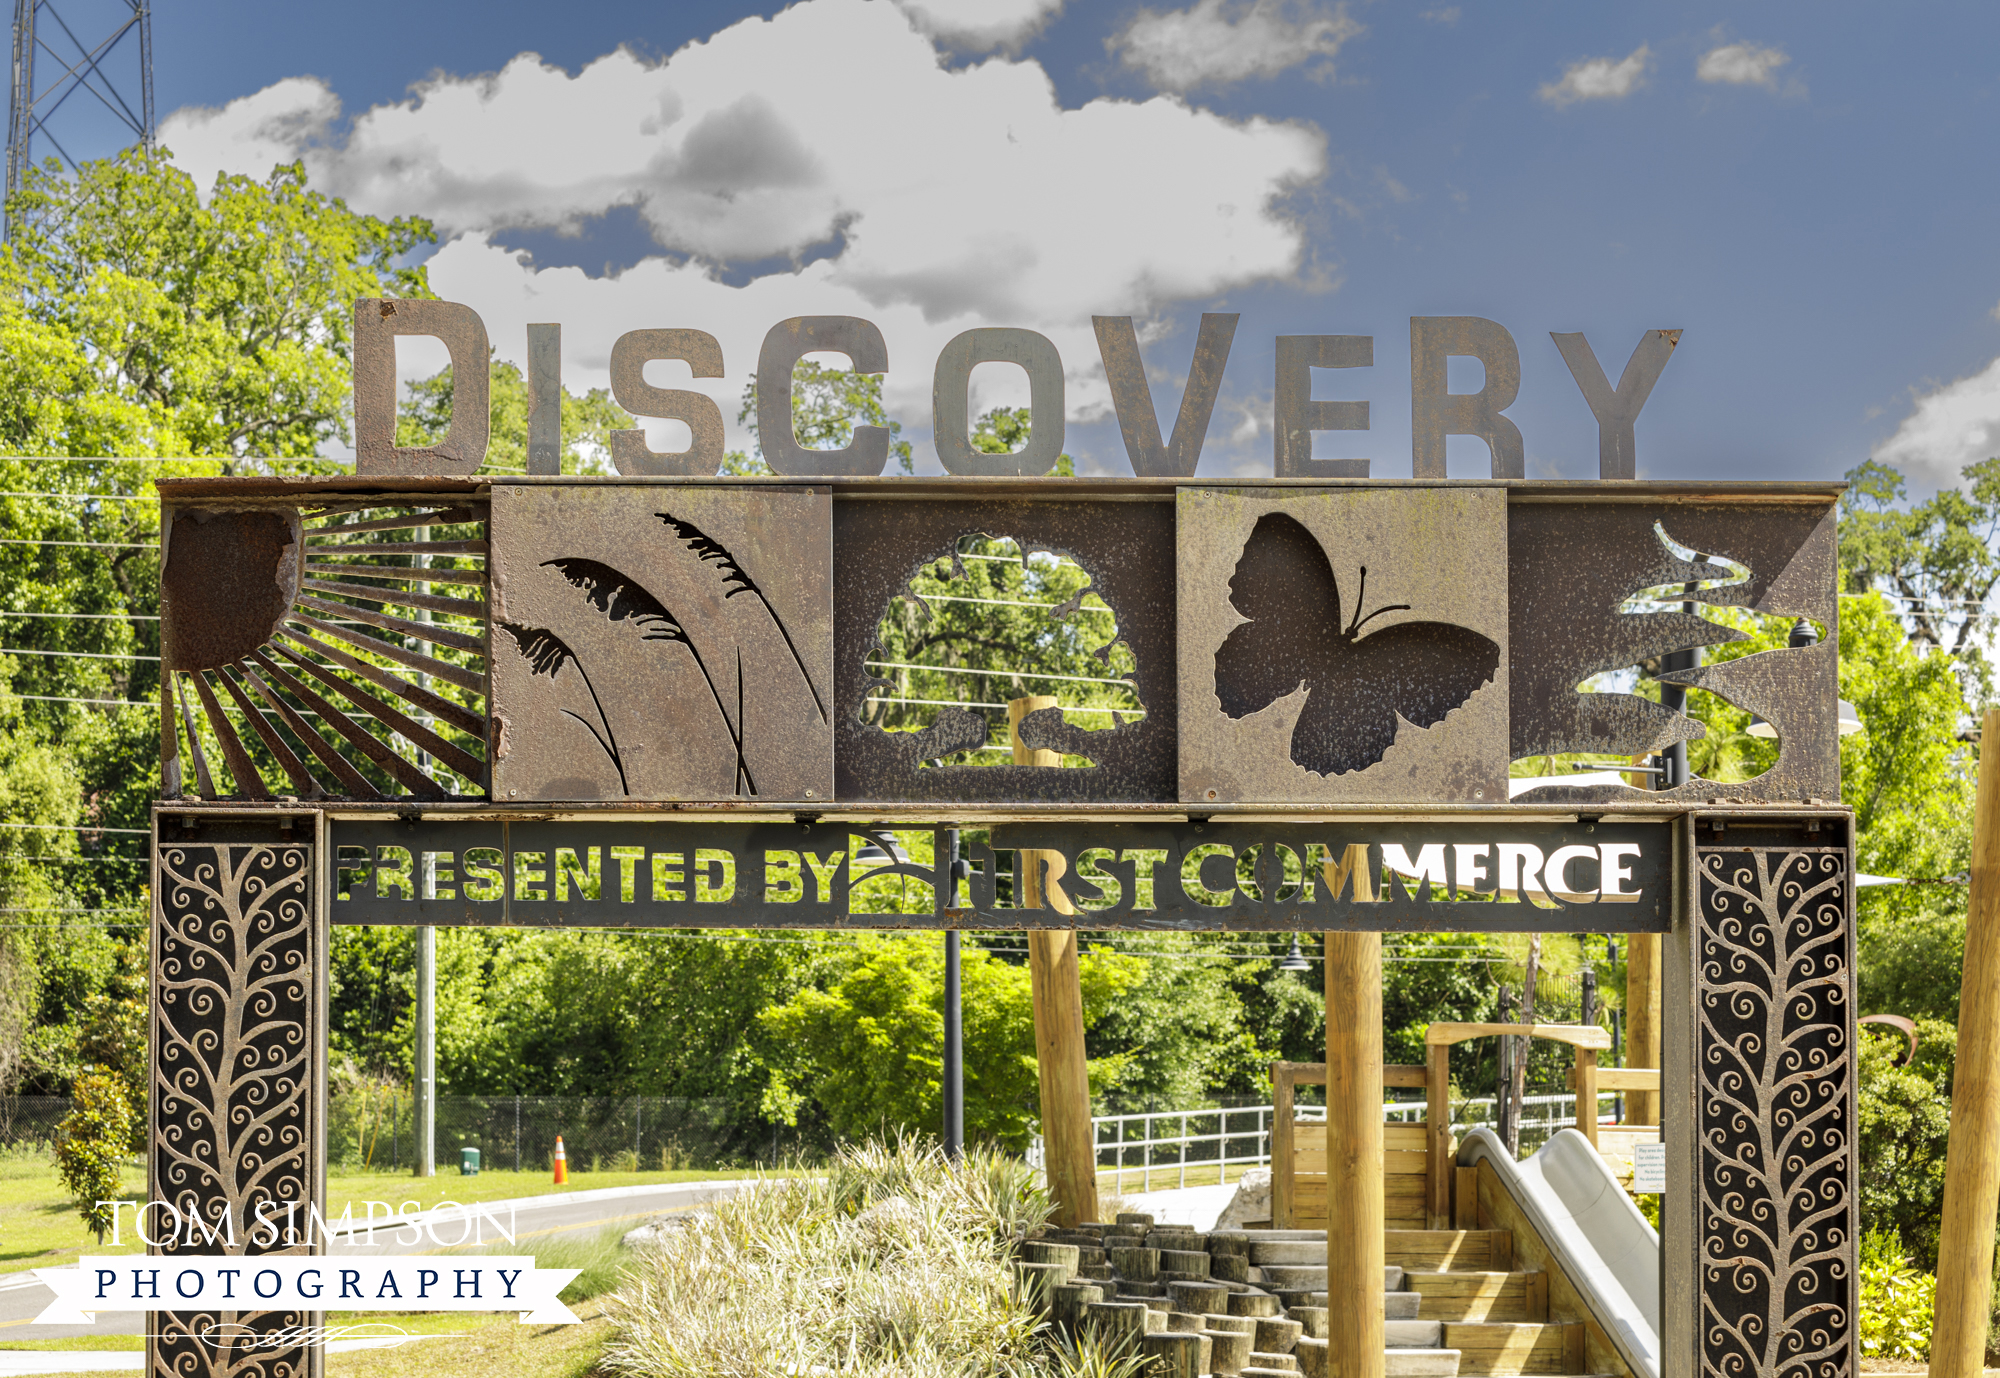 discovery garden has something for all ages